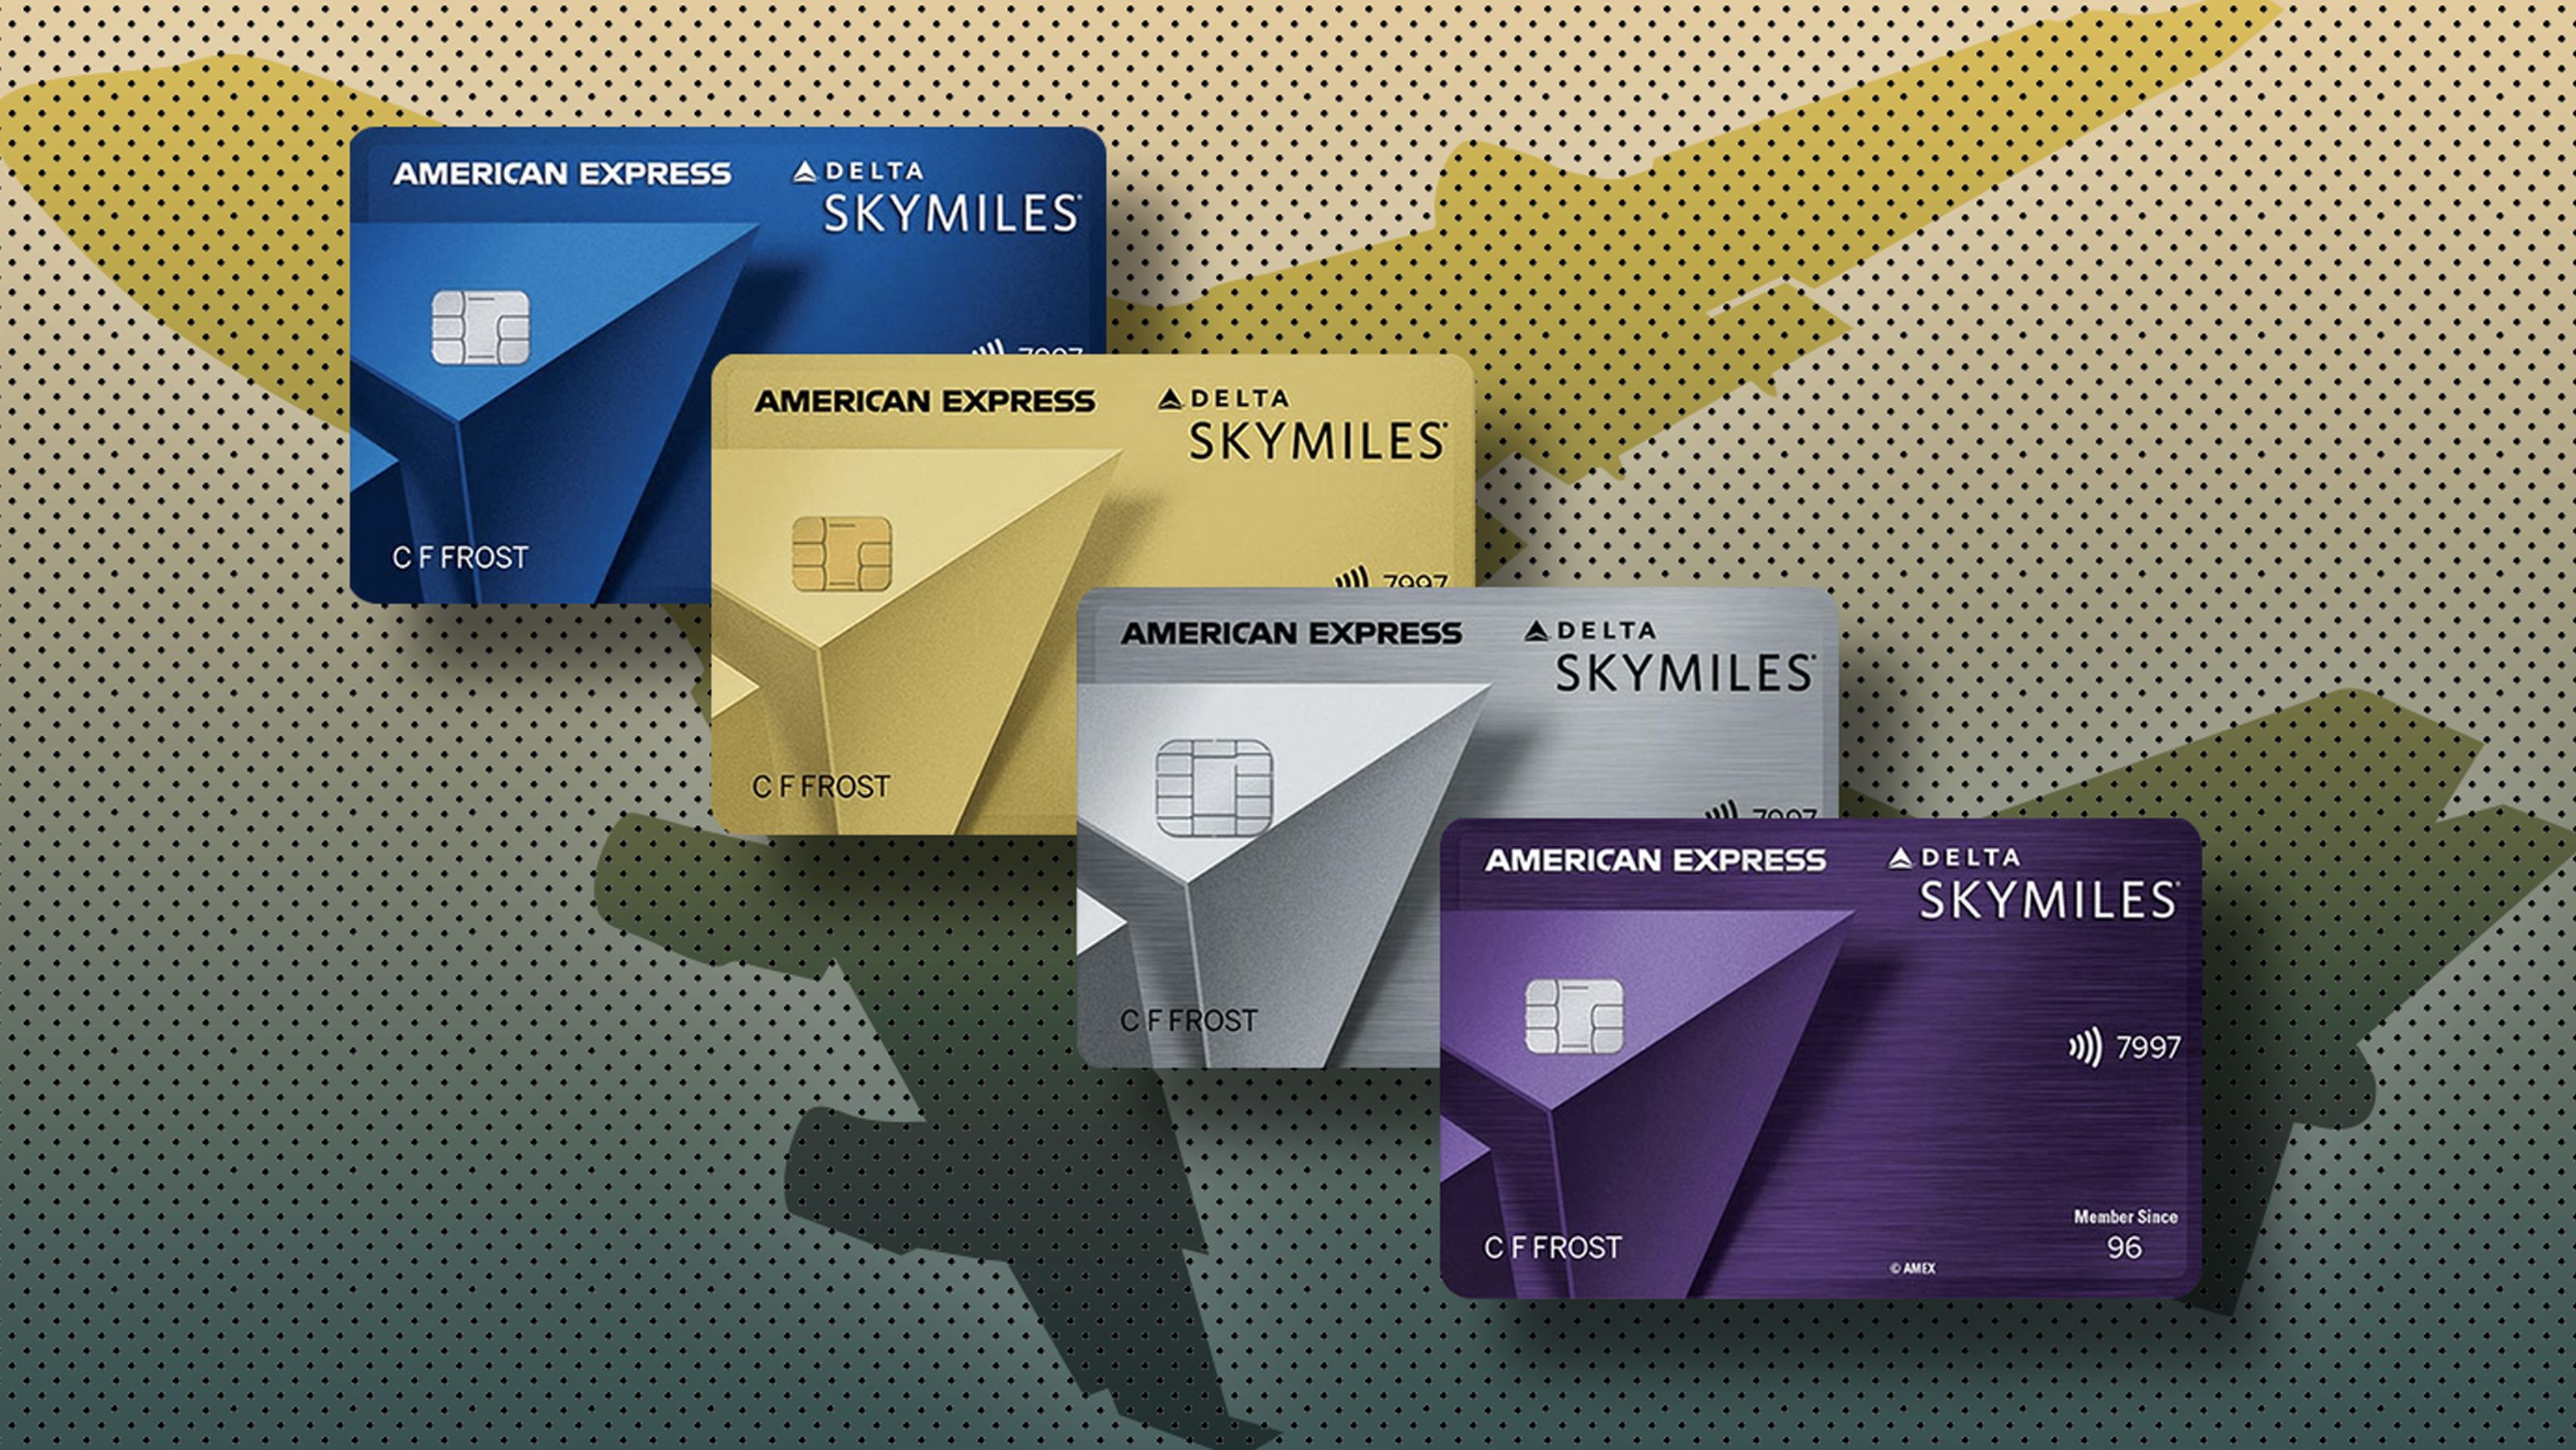 6. Rewards Rate: Earn Up to 3X Miles on Delta and Hotel Purchases and More